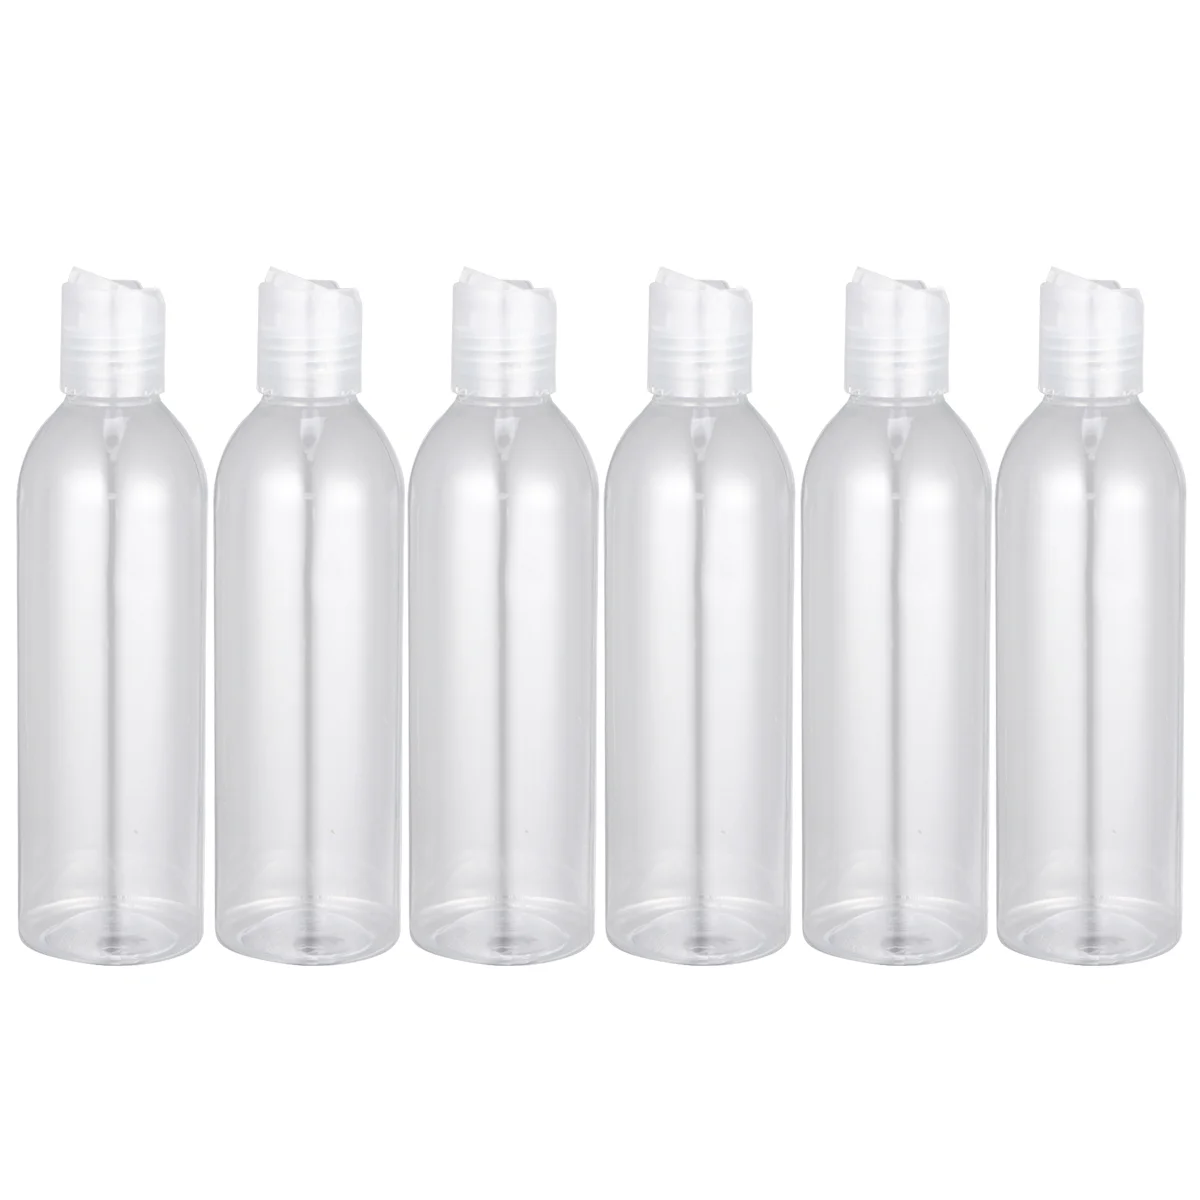 

6pcs Empty Bottles Refillable Bottles with Cap Travel Bottle Containers for Shampoo Lotion, 250ml ( Transparent ) Essentials